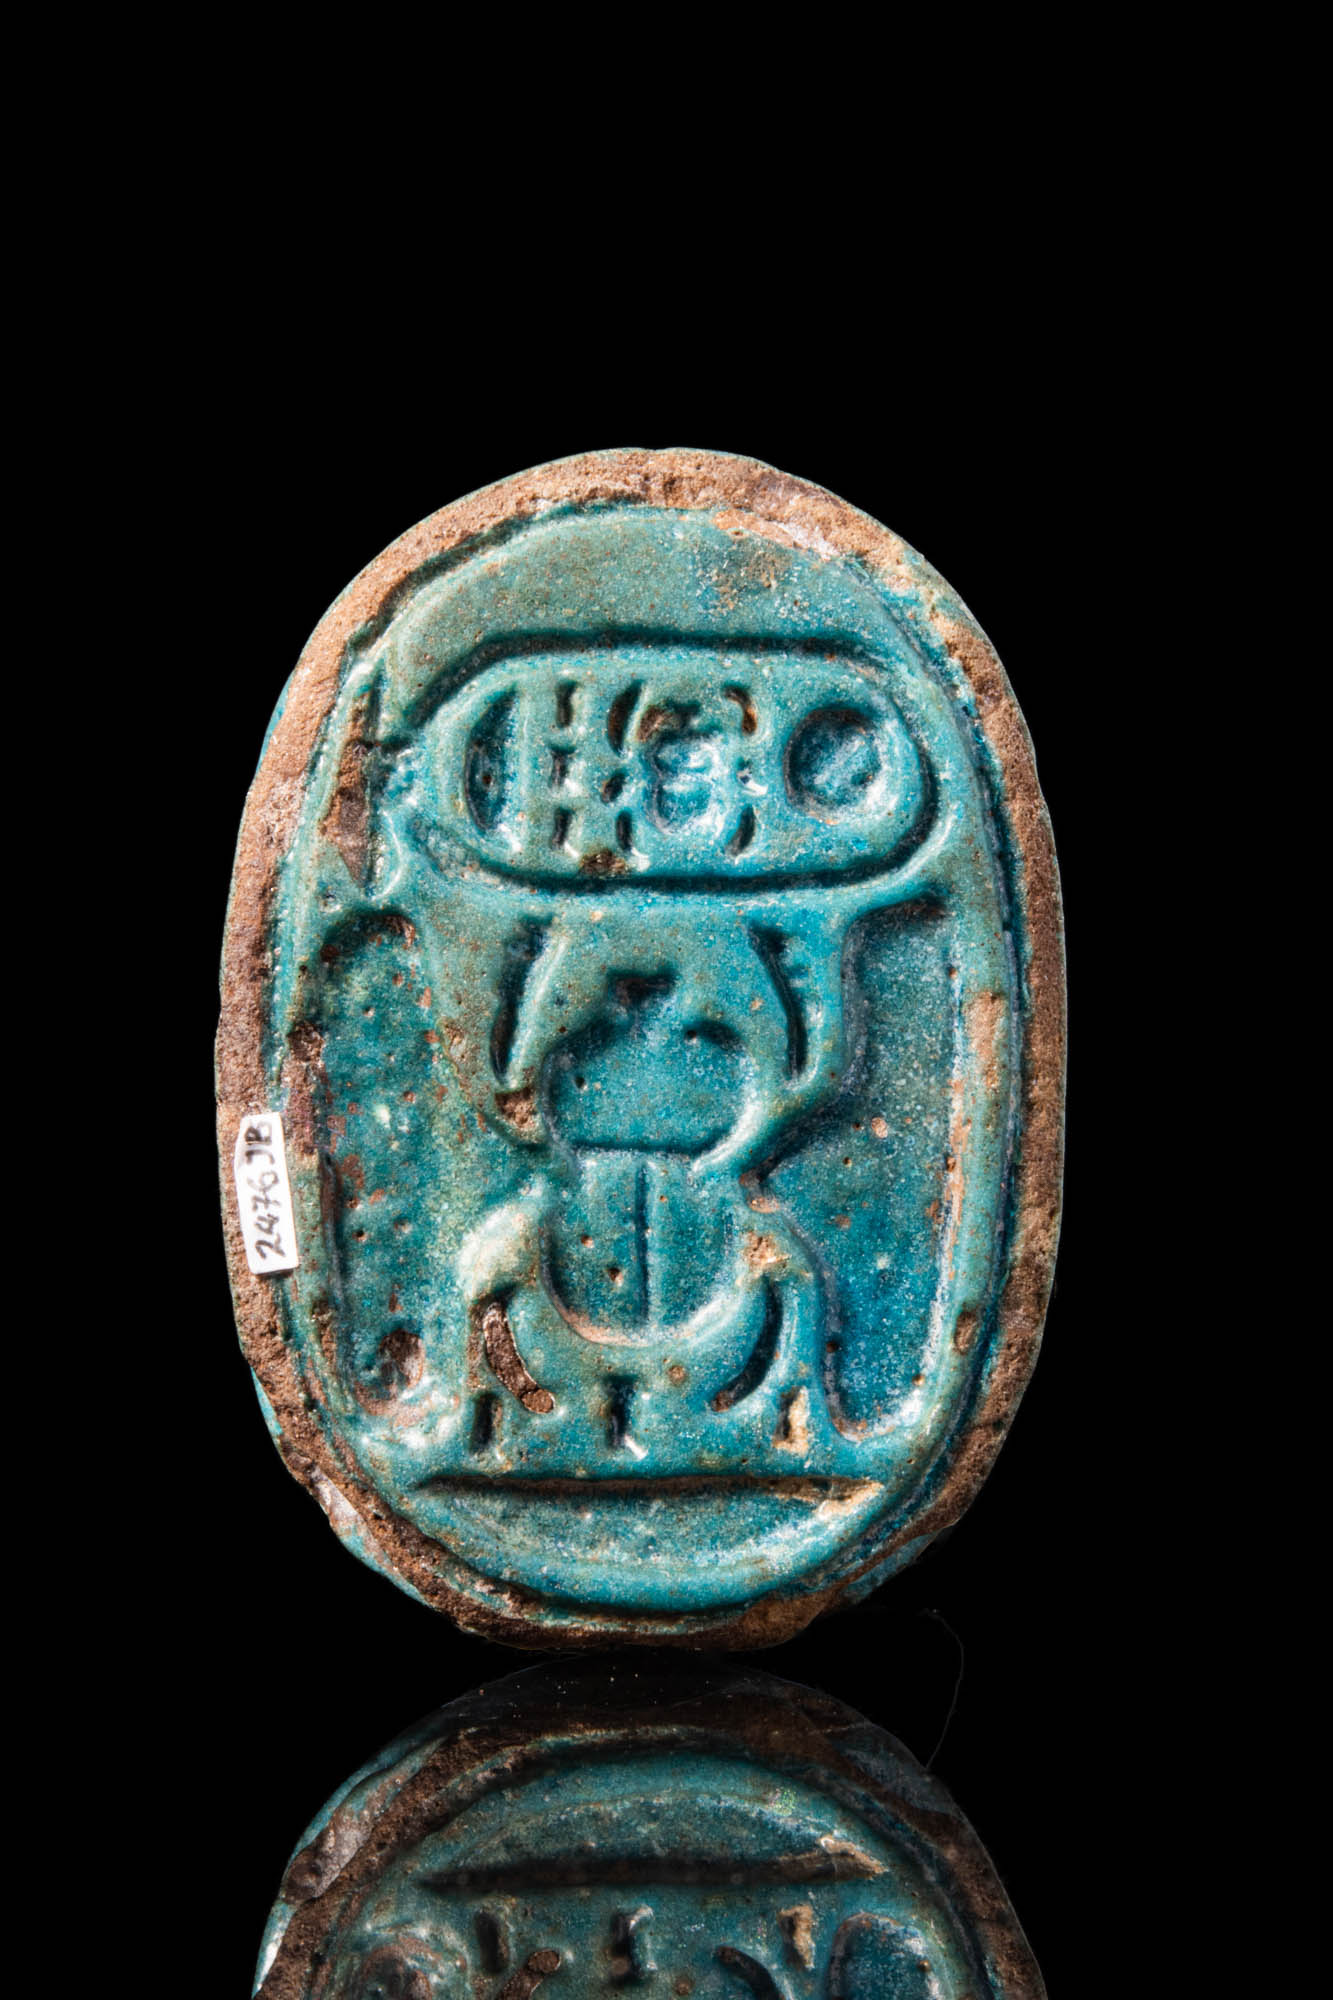 HUGE EGYPTIAN FAIENCE SCARAB WITH CARTOUCHE OF TUT - ANCH - AMON - Image 4 of 4